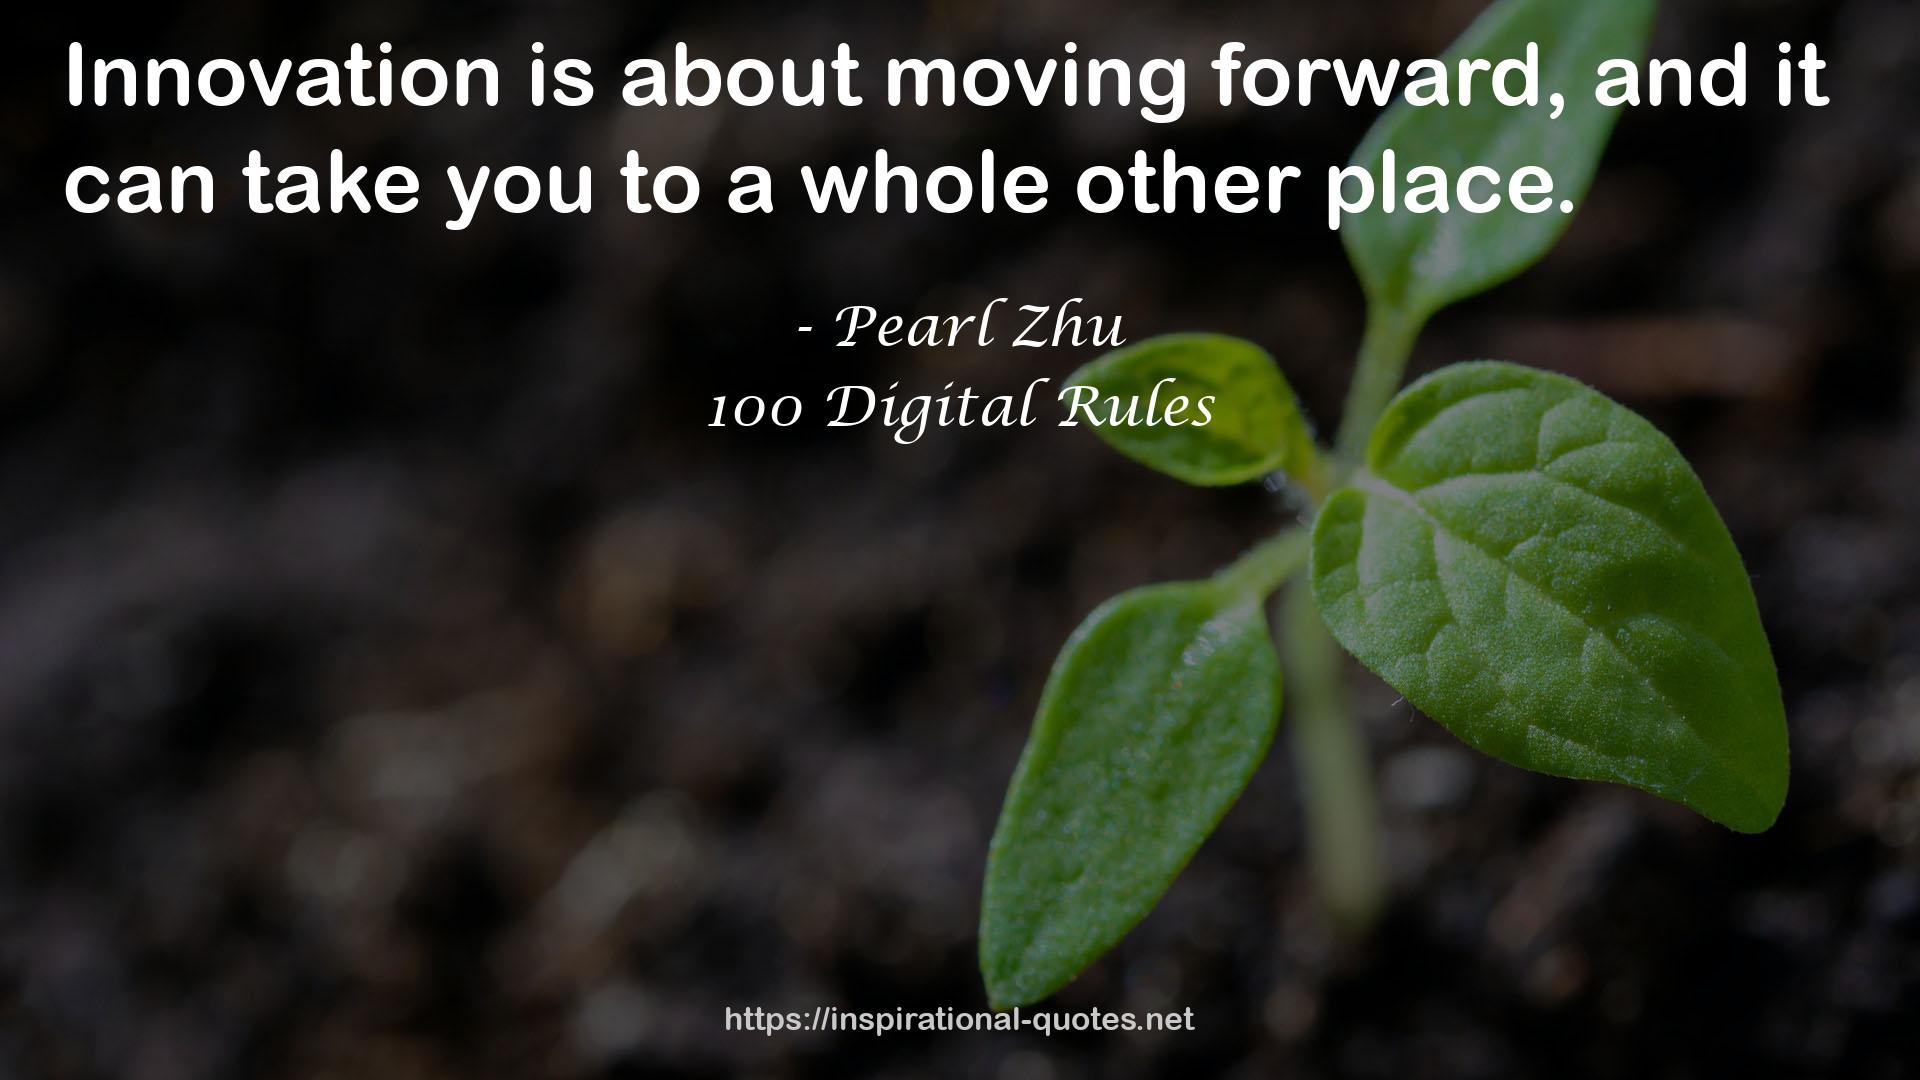 100 Digital Rules QUOTES